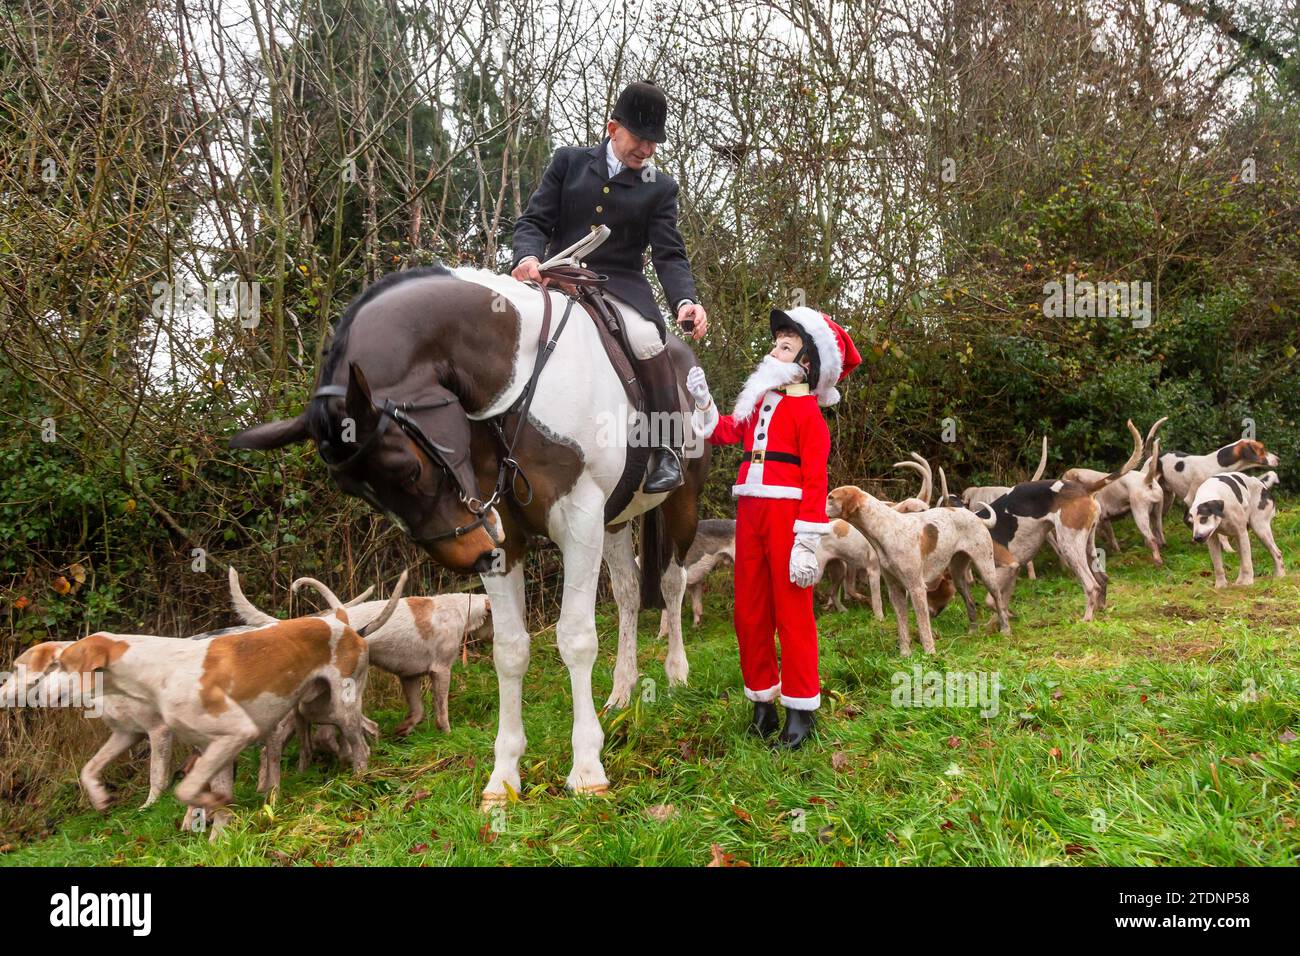 Upper Arley, Kidderminster, Worcestershire, UK. 19th Dec, 2023. 10-year-old Henley Mills dressed as Santa Claus hands the traditional glass of port to the Master of the Foxhounds from the Albrighton and Woodland hunt as they have a lawn meet and trail ride from a farm in Upper Arley, near Kidderminster in Worcestershire. Credit: Peter Lopeman/Alamy Live News Stock Photo